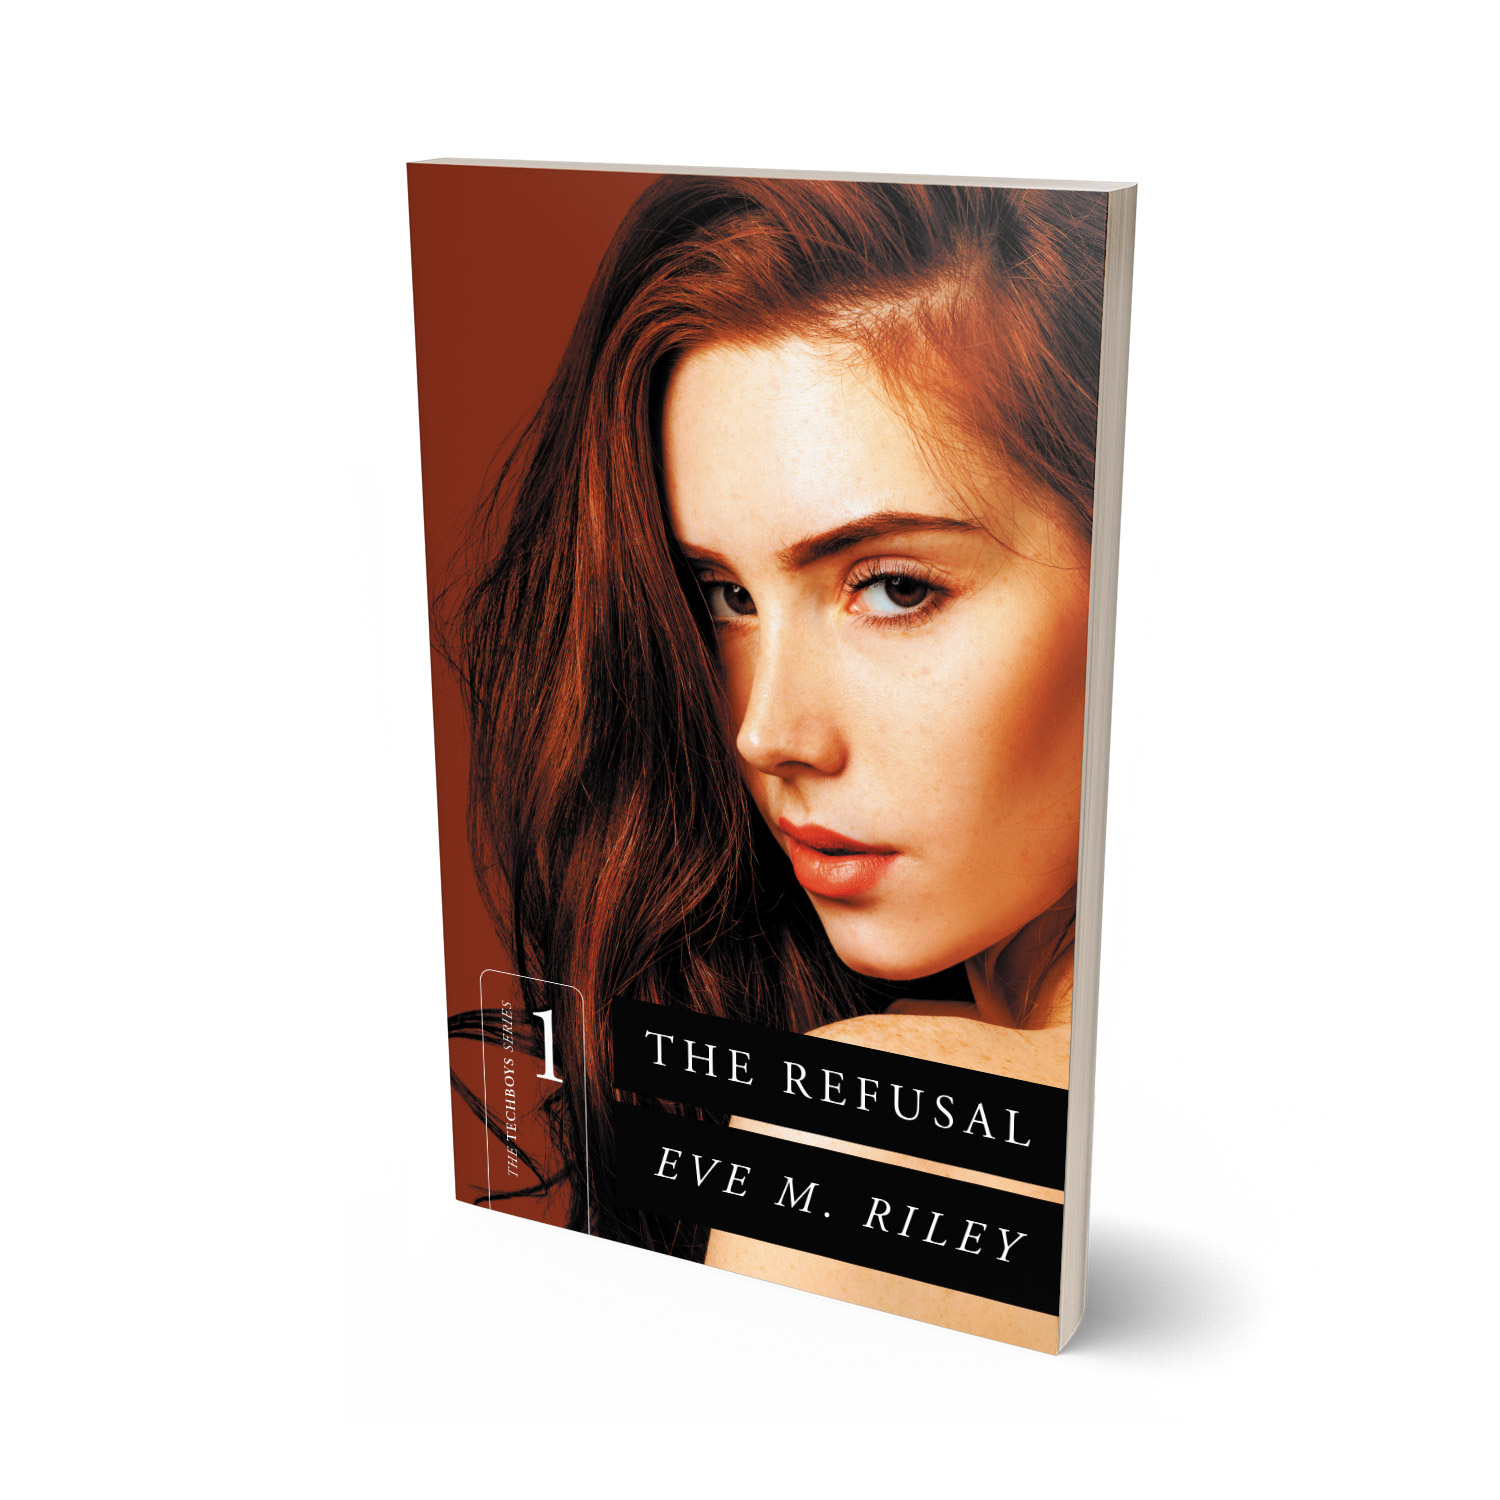 'The Refusal' is the first instalment in an electrifying modern romance series by Eve M. Riley. The book cover design & interior formatting are by Mark Thomas. To learn more about what Mark could do for your book, please visit coverness.com.